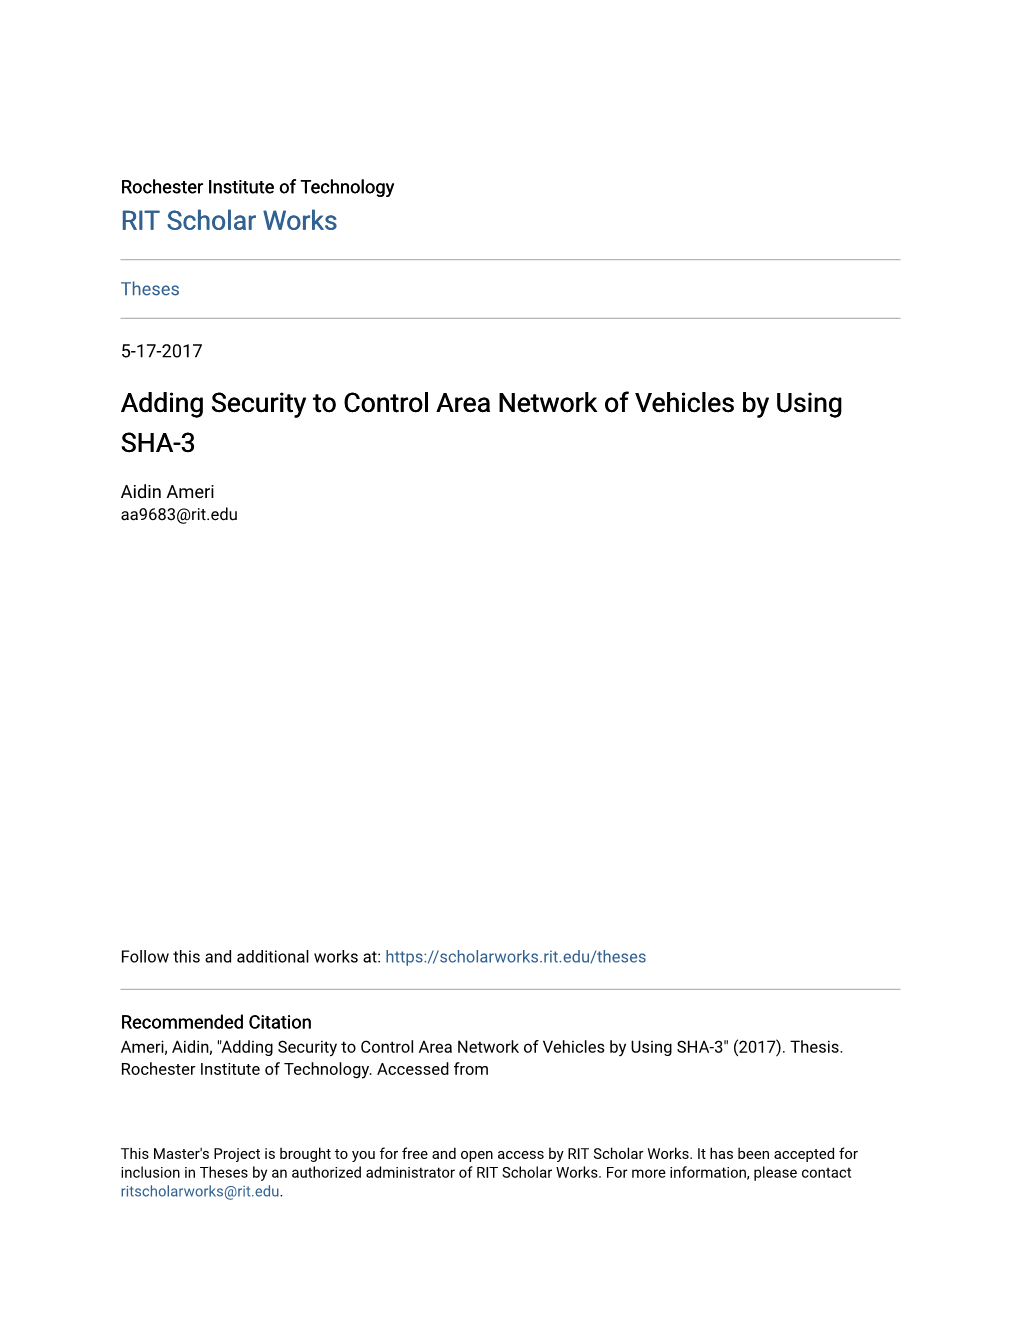 Adding Security to Control Area Network of Vehicles by Using SHA-3